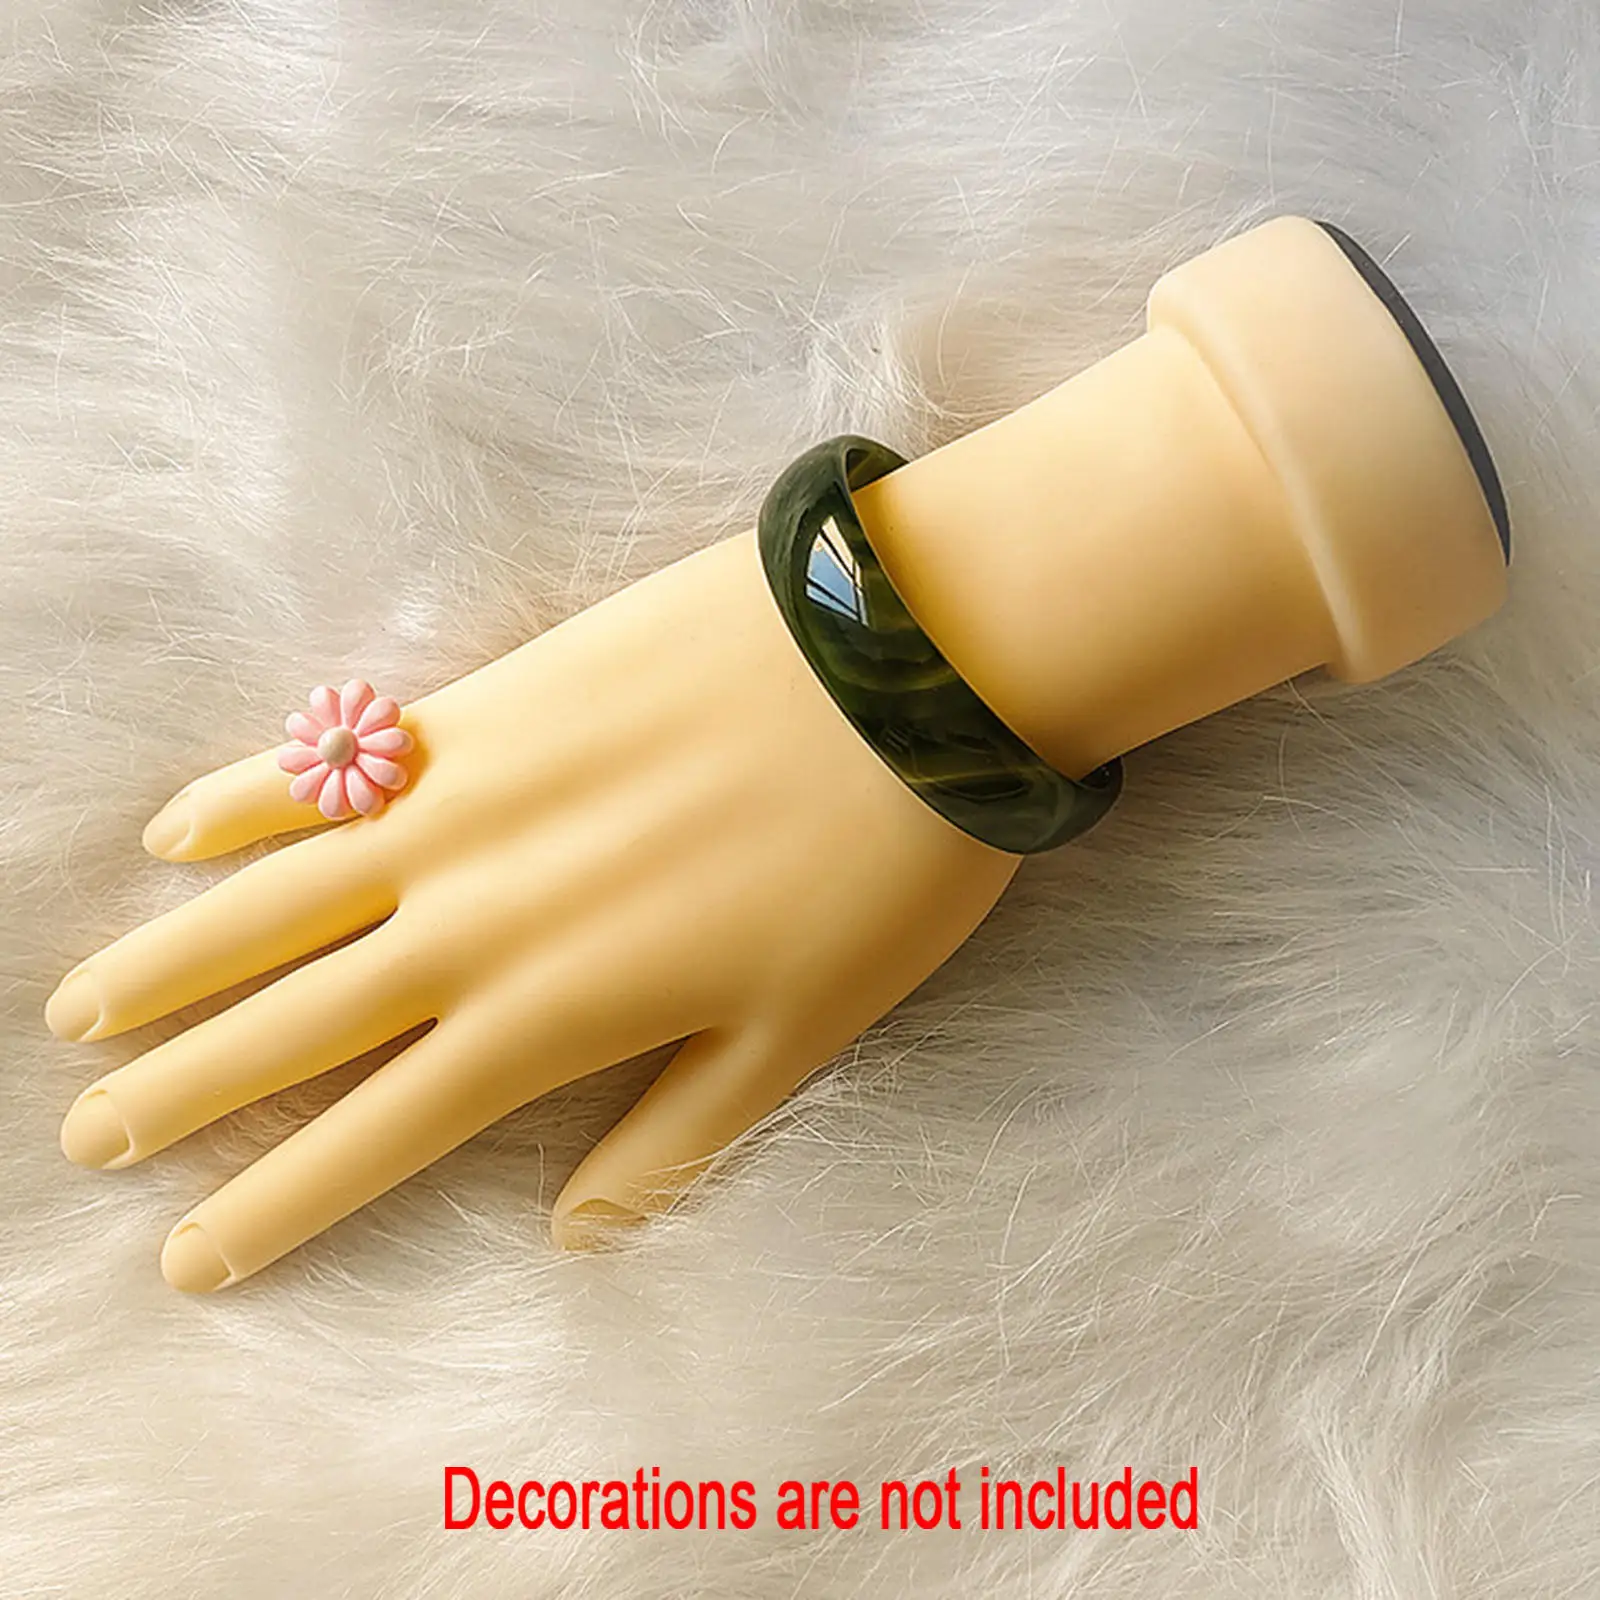 Nail Practice Hand Bendable Silicone Rubber Art Supplies Fake Model for Nails Practice